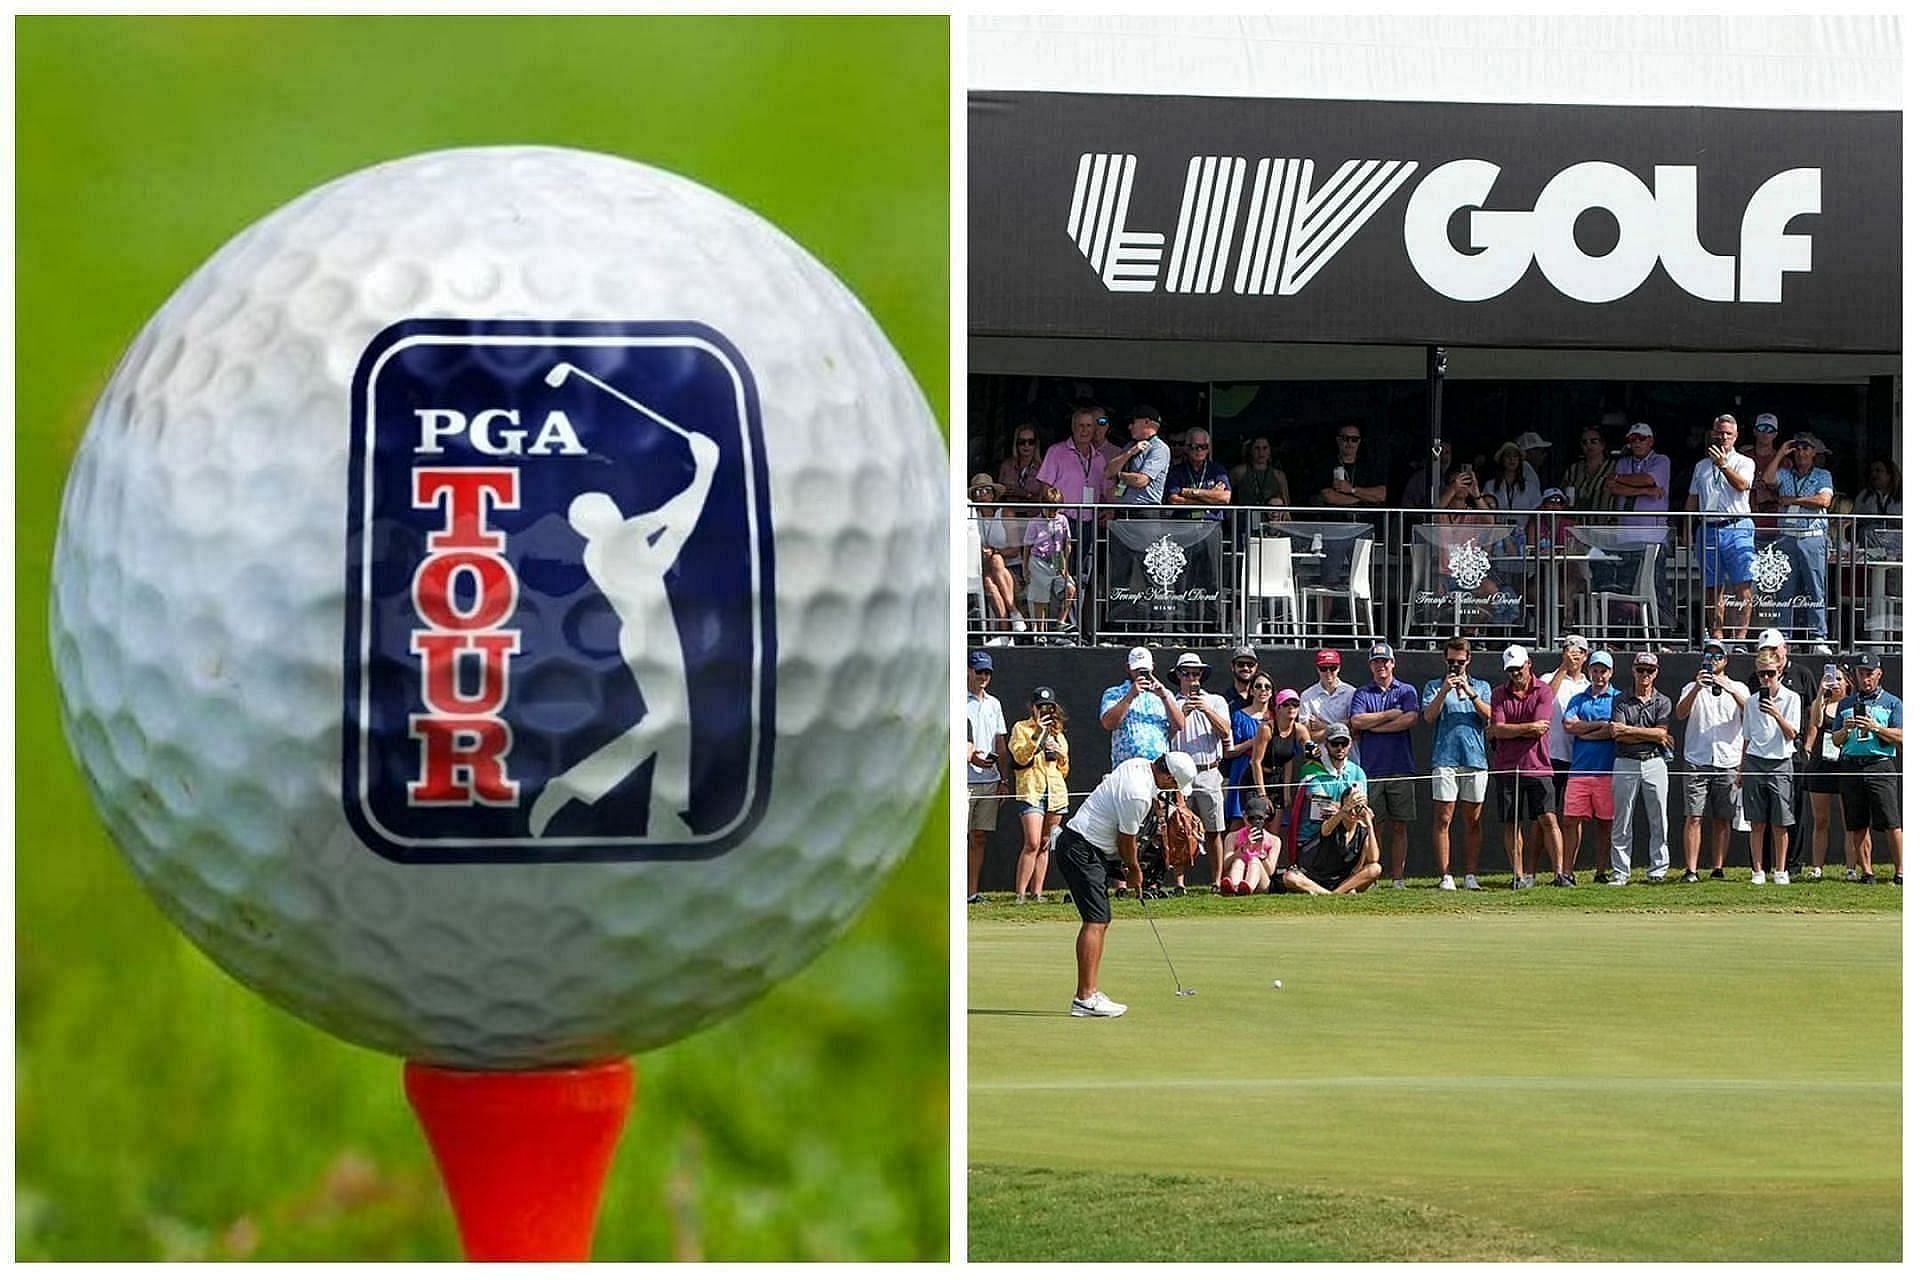 A survey revealed that the LIV Golf fans are more left leaning while more PGA Tour fans identified themselves as conservative